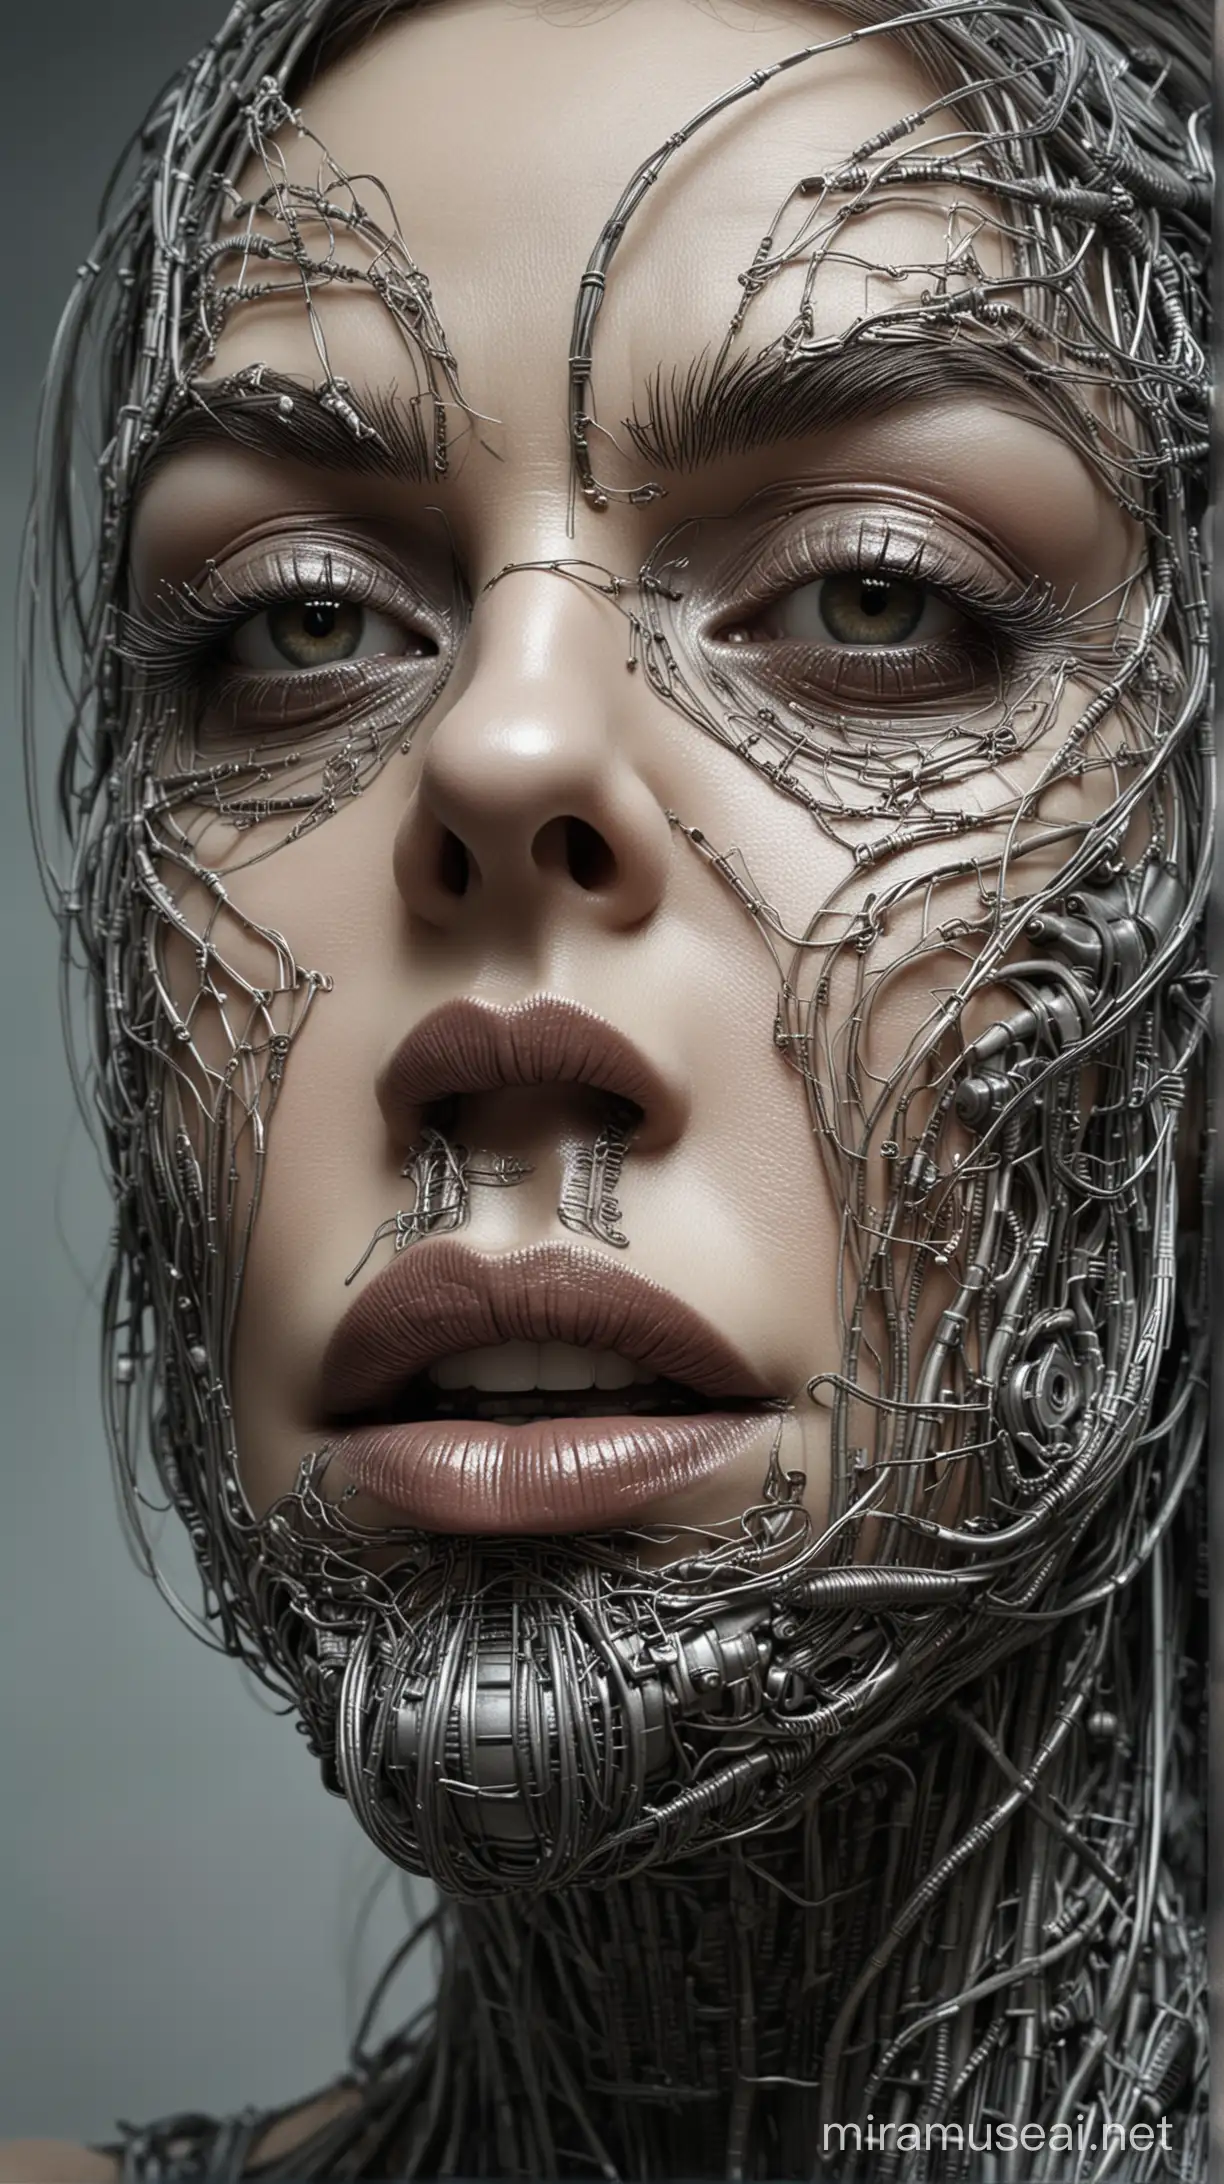 Futuristic Cyberpunk Lips Sculpture Intricately Crafted Wire Art in Giger Style